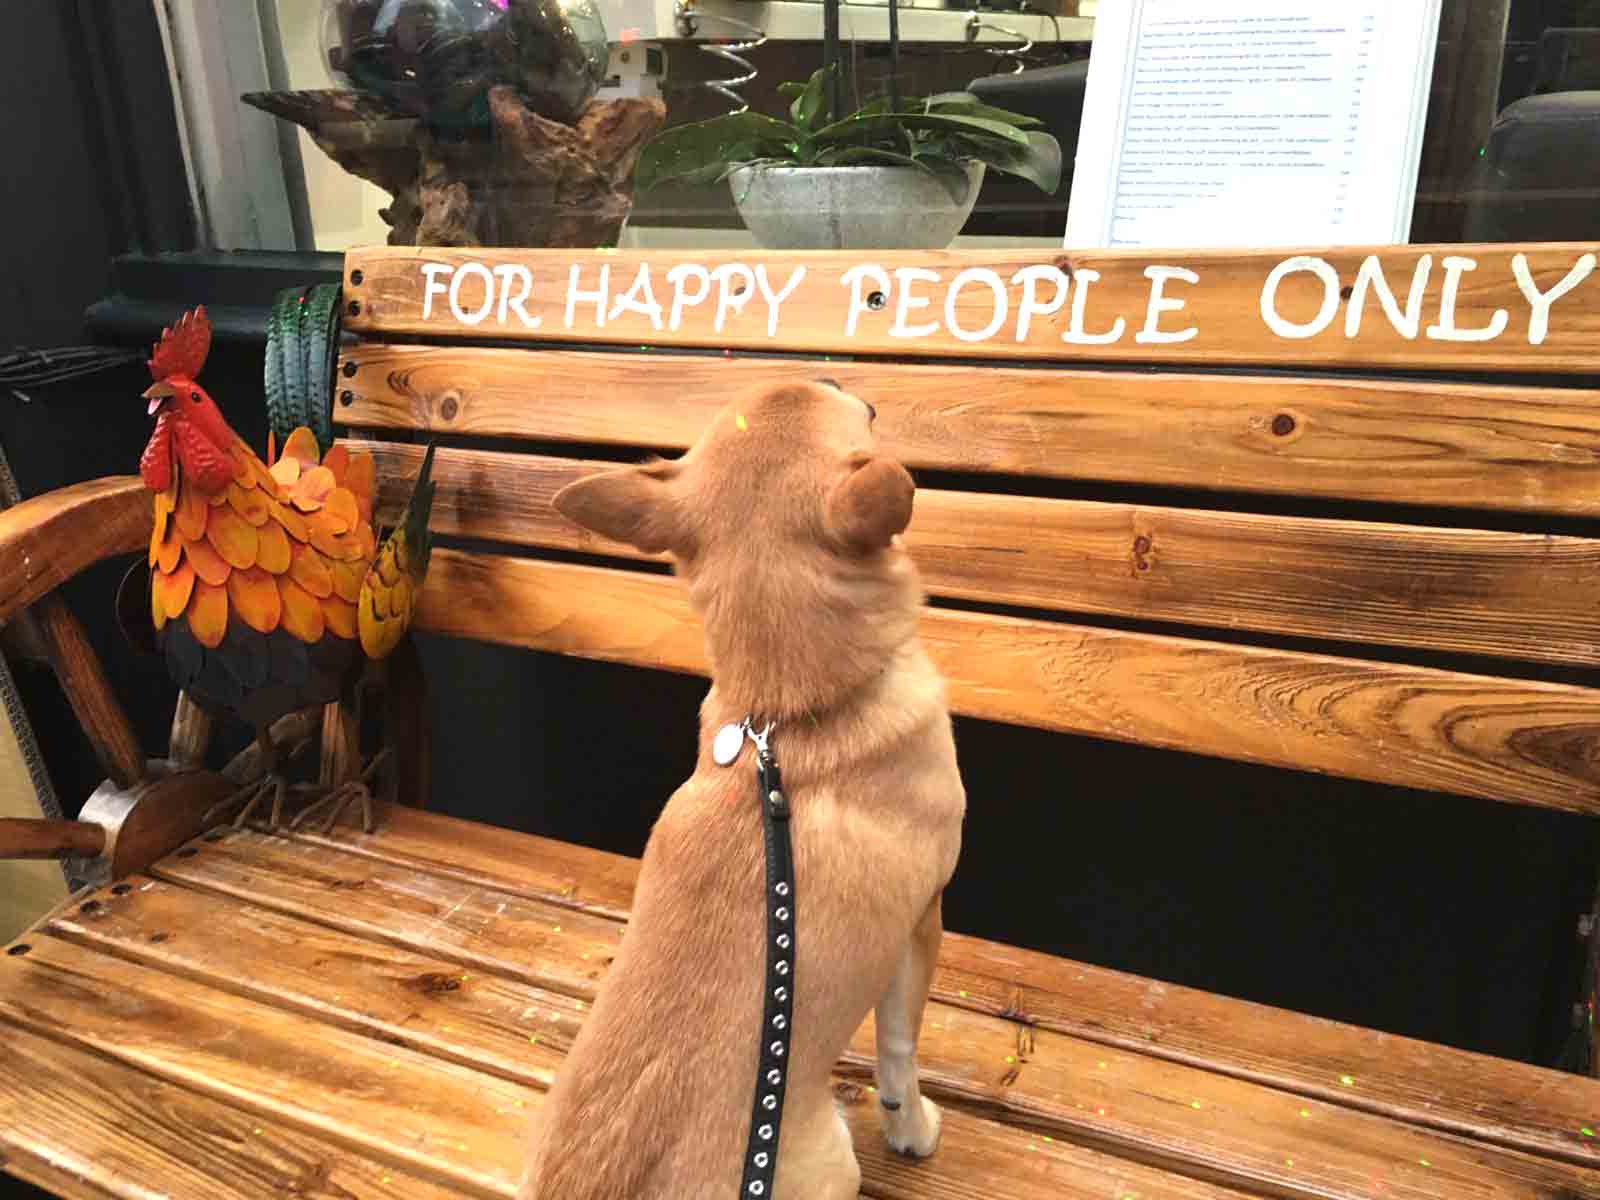 Cute Dog Stories: The Happy Bench!